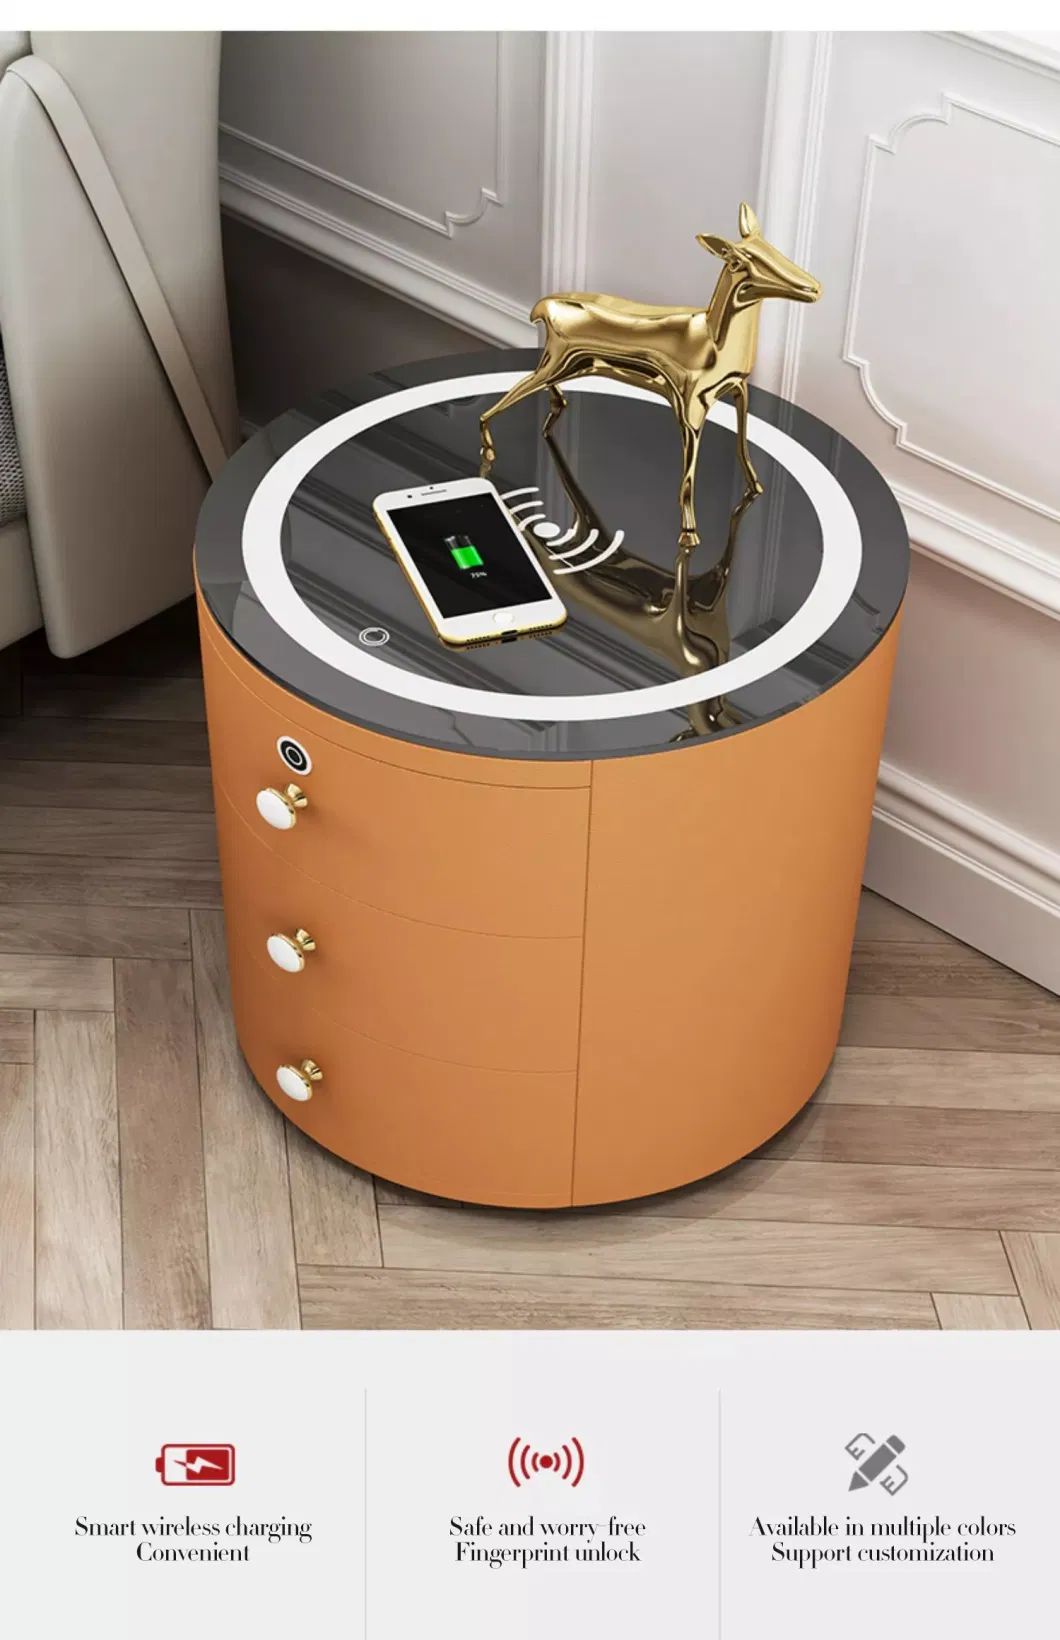 New Round Design Smart Bedroom Nightstands Touch LED Lights Modern Smart Leather Finish Bedside Table